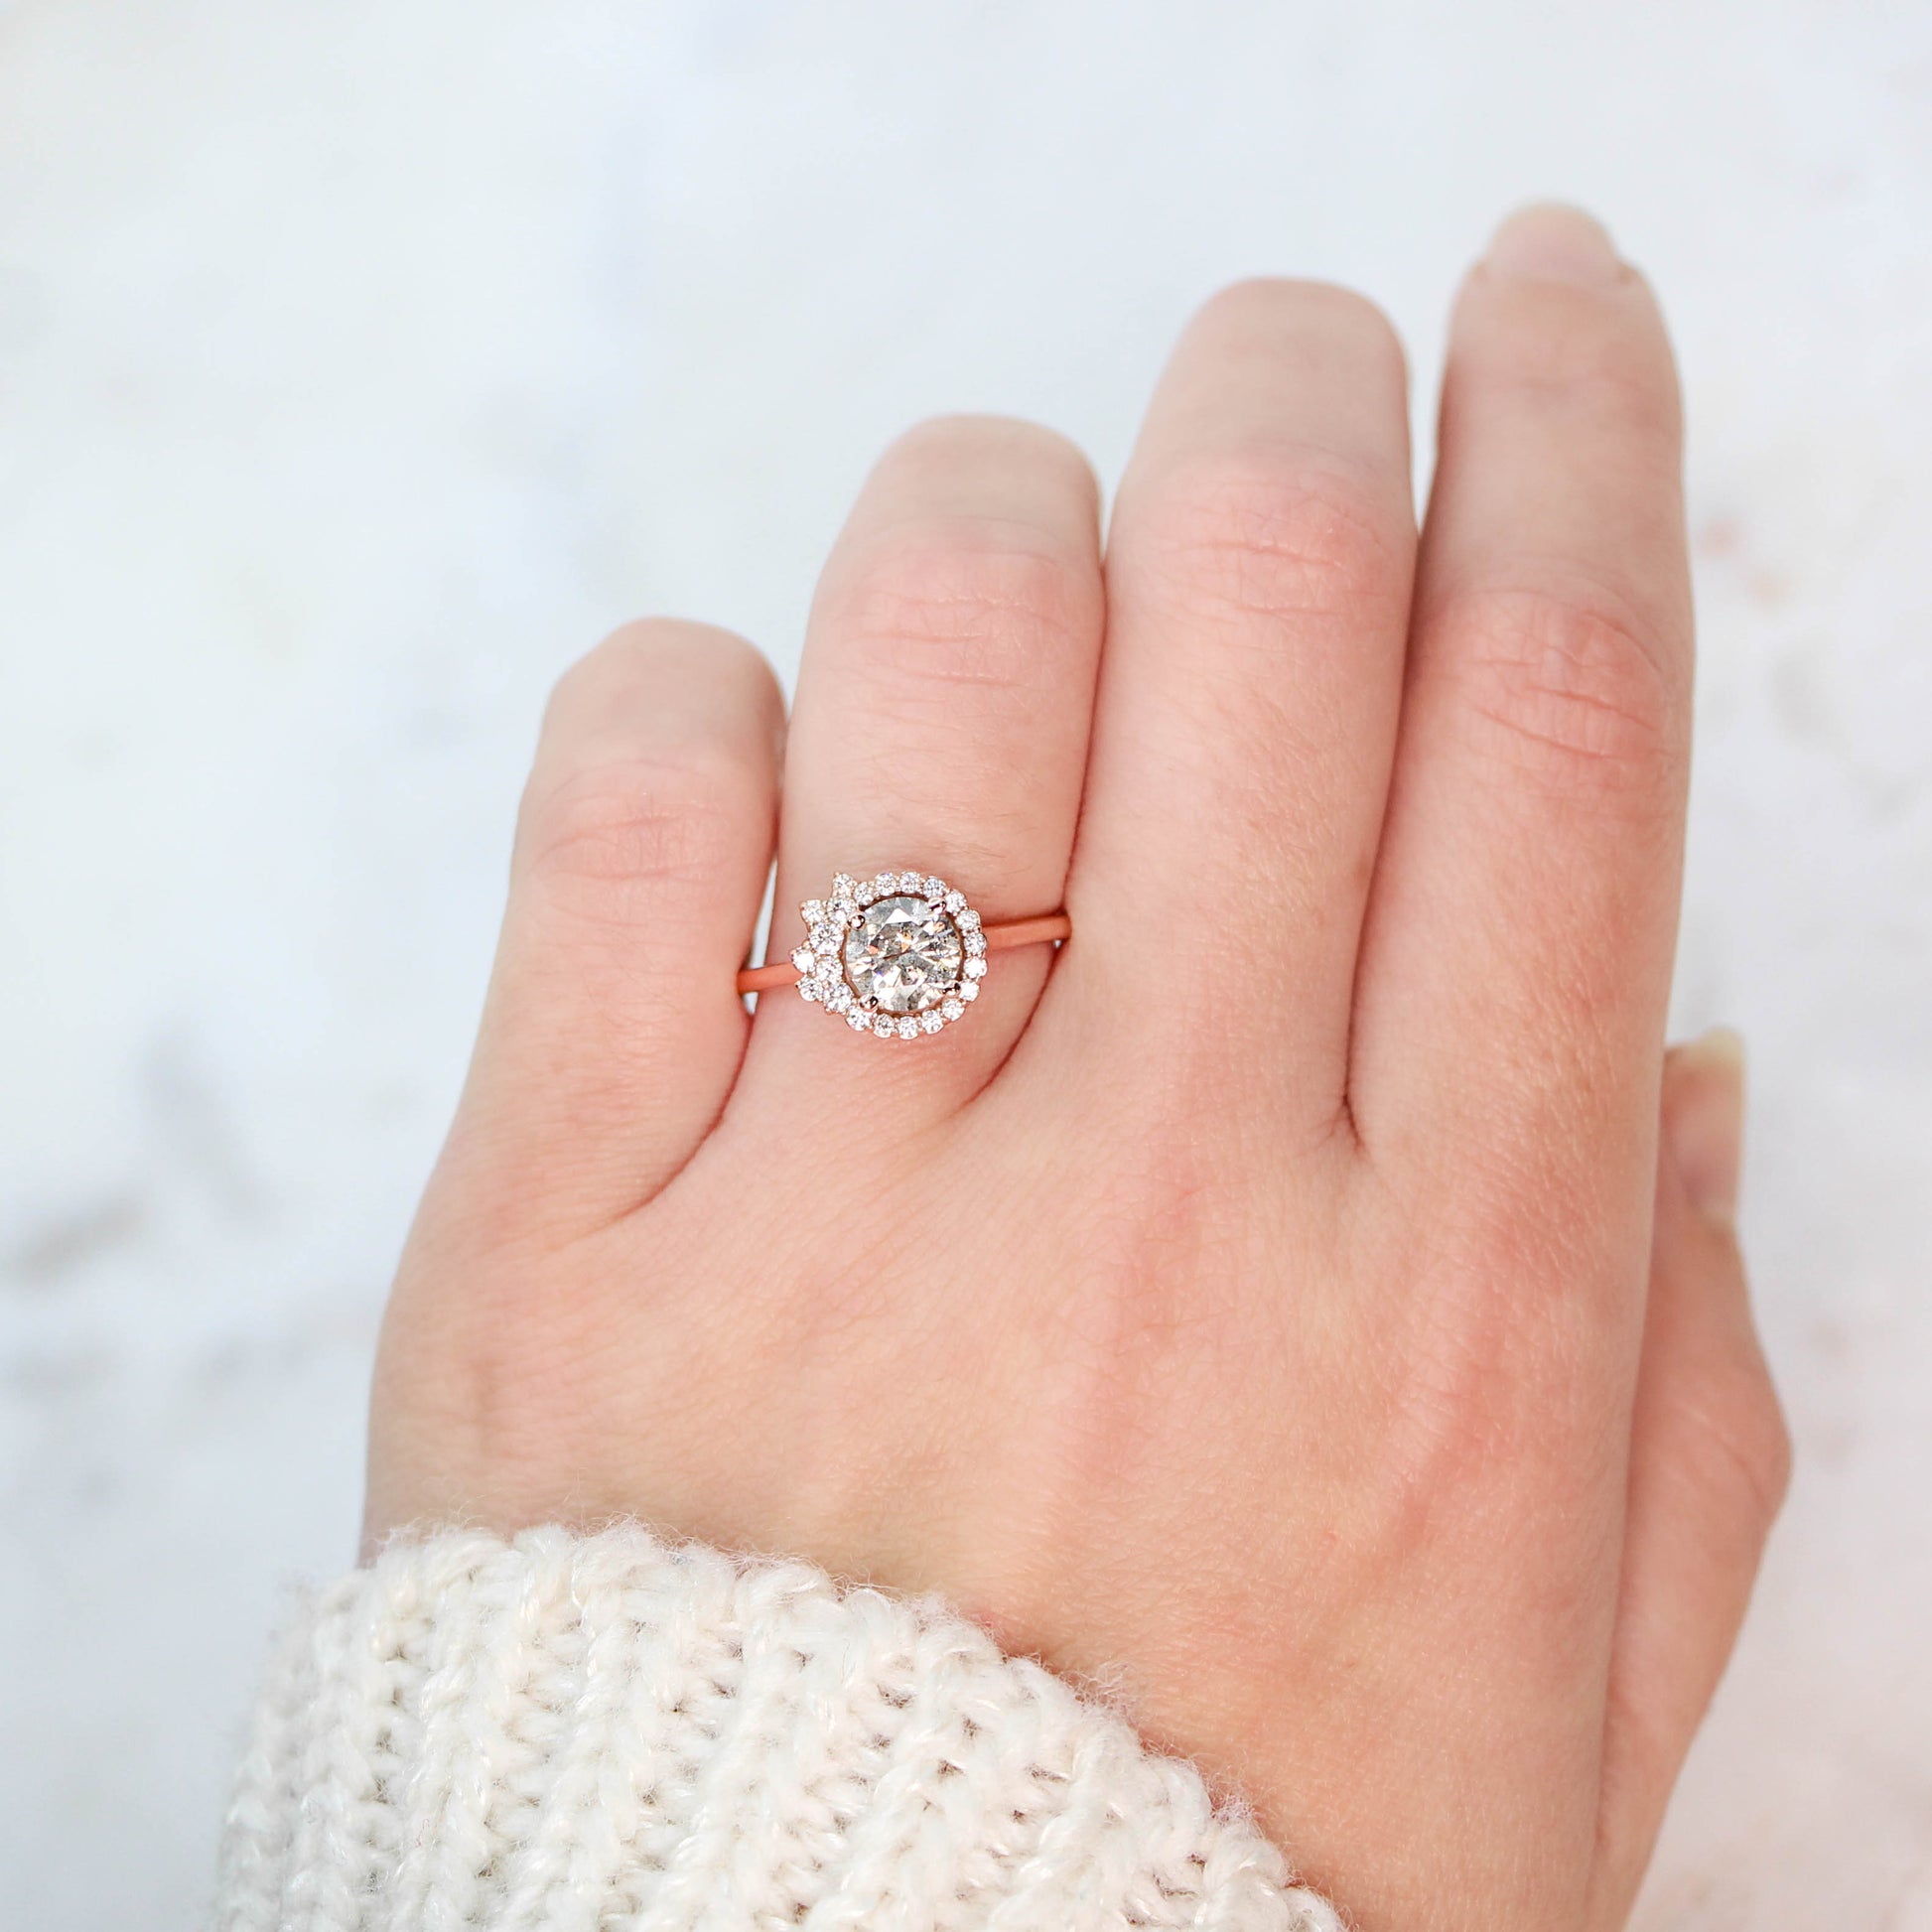 Alizeh Ring with a 0.94 Carat Round Gray Celestial Diamond and White Accent Diamonds in 14k Rose Gold - Ready to Size and Ship - Midwinter Co. Alternative Bridal Rings and Modern Fine Jewelry